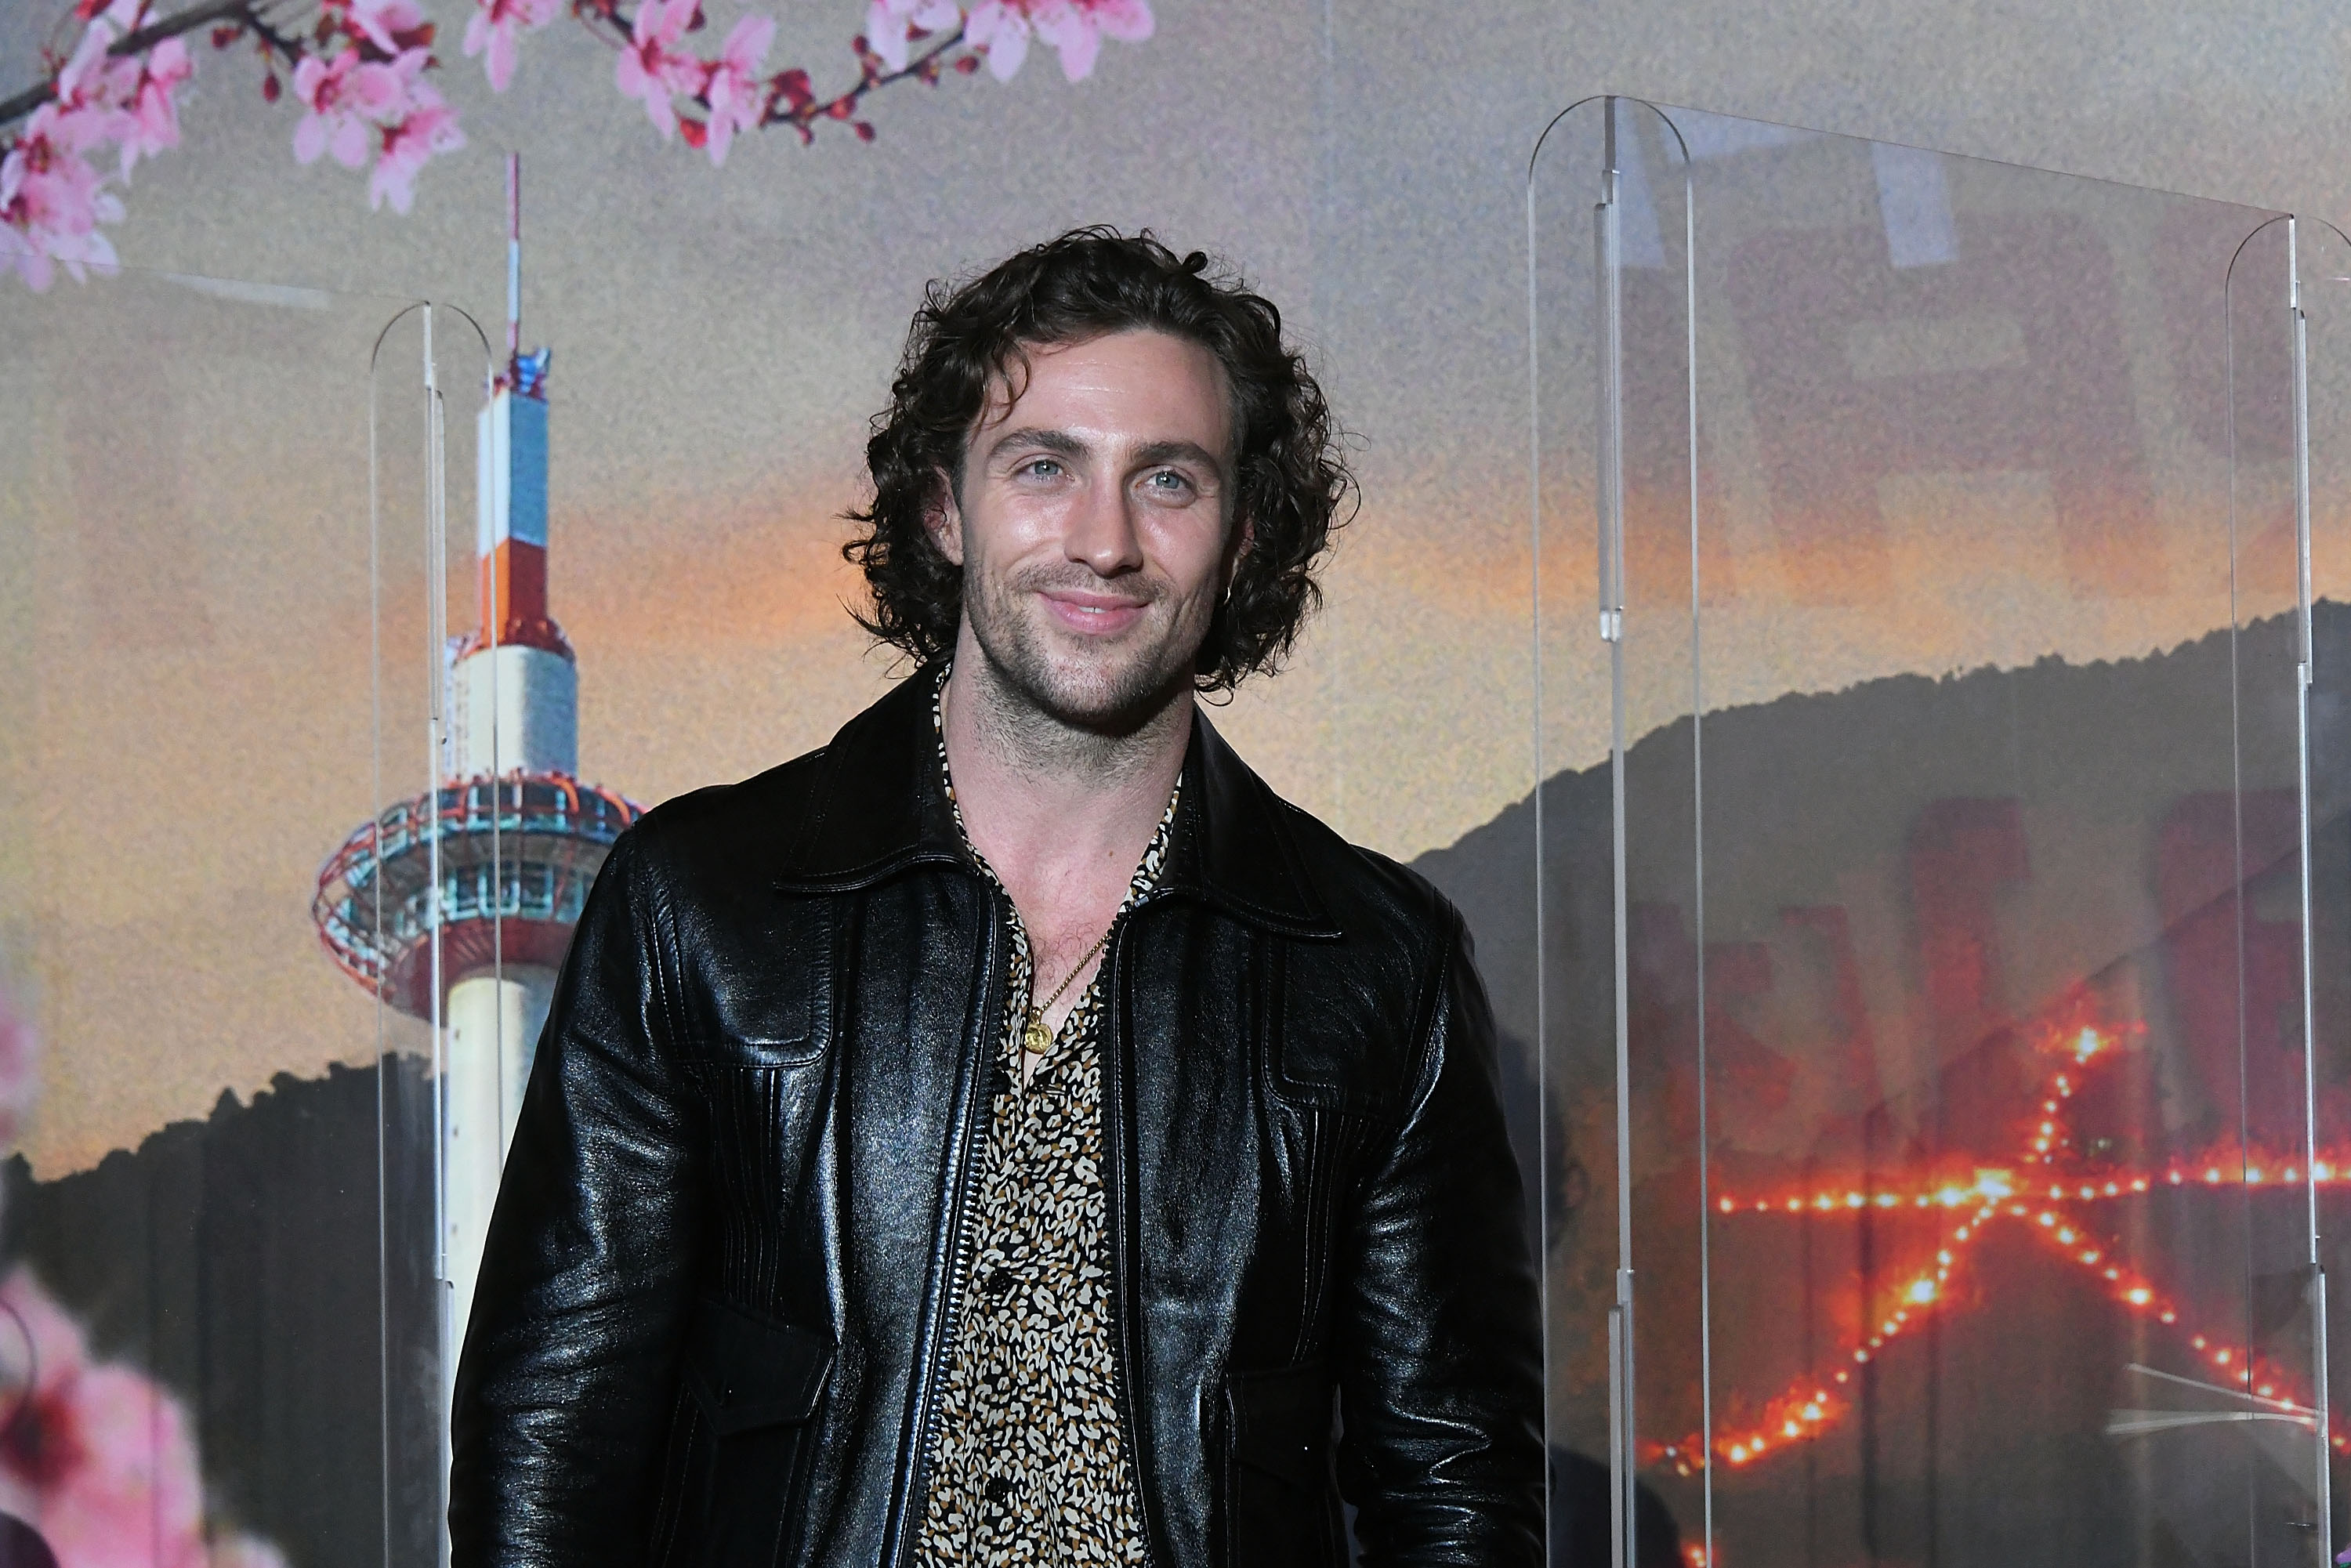 Aaron Taylor-Johnson attends the "Bullet Train" stage greeting at Toho Cinemas Kyoto on August 23, 2022 in Kyoto, Japan.